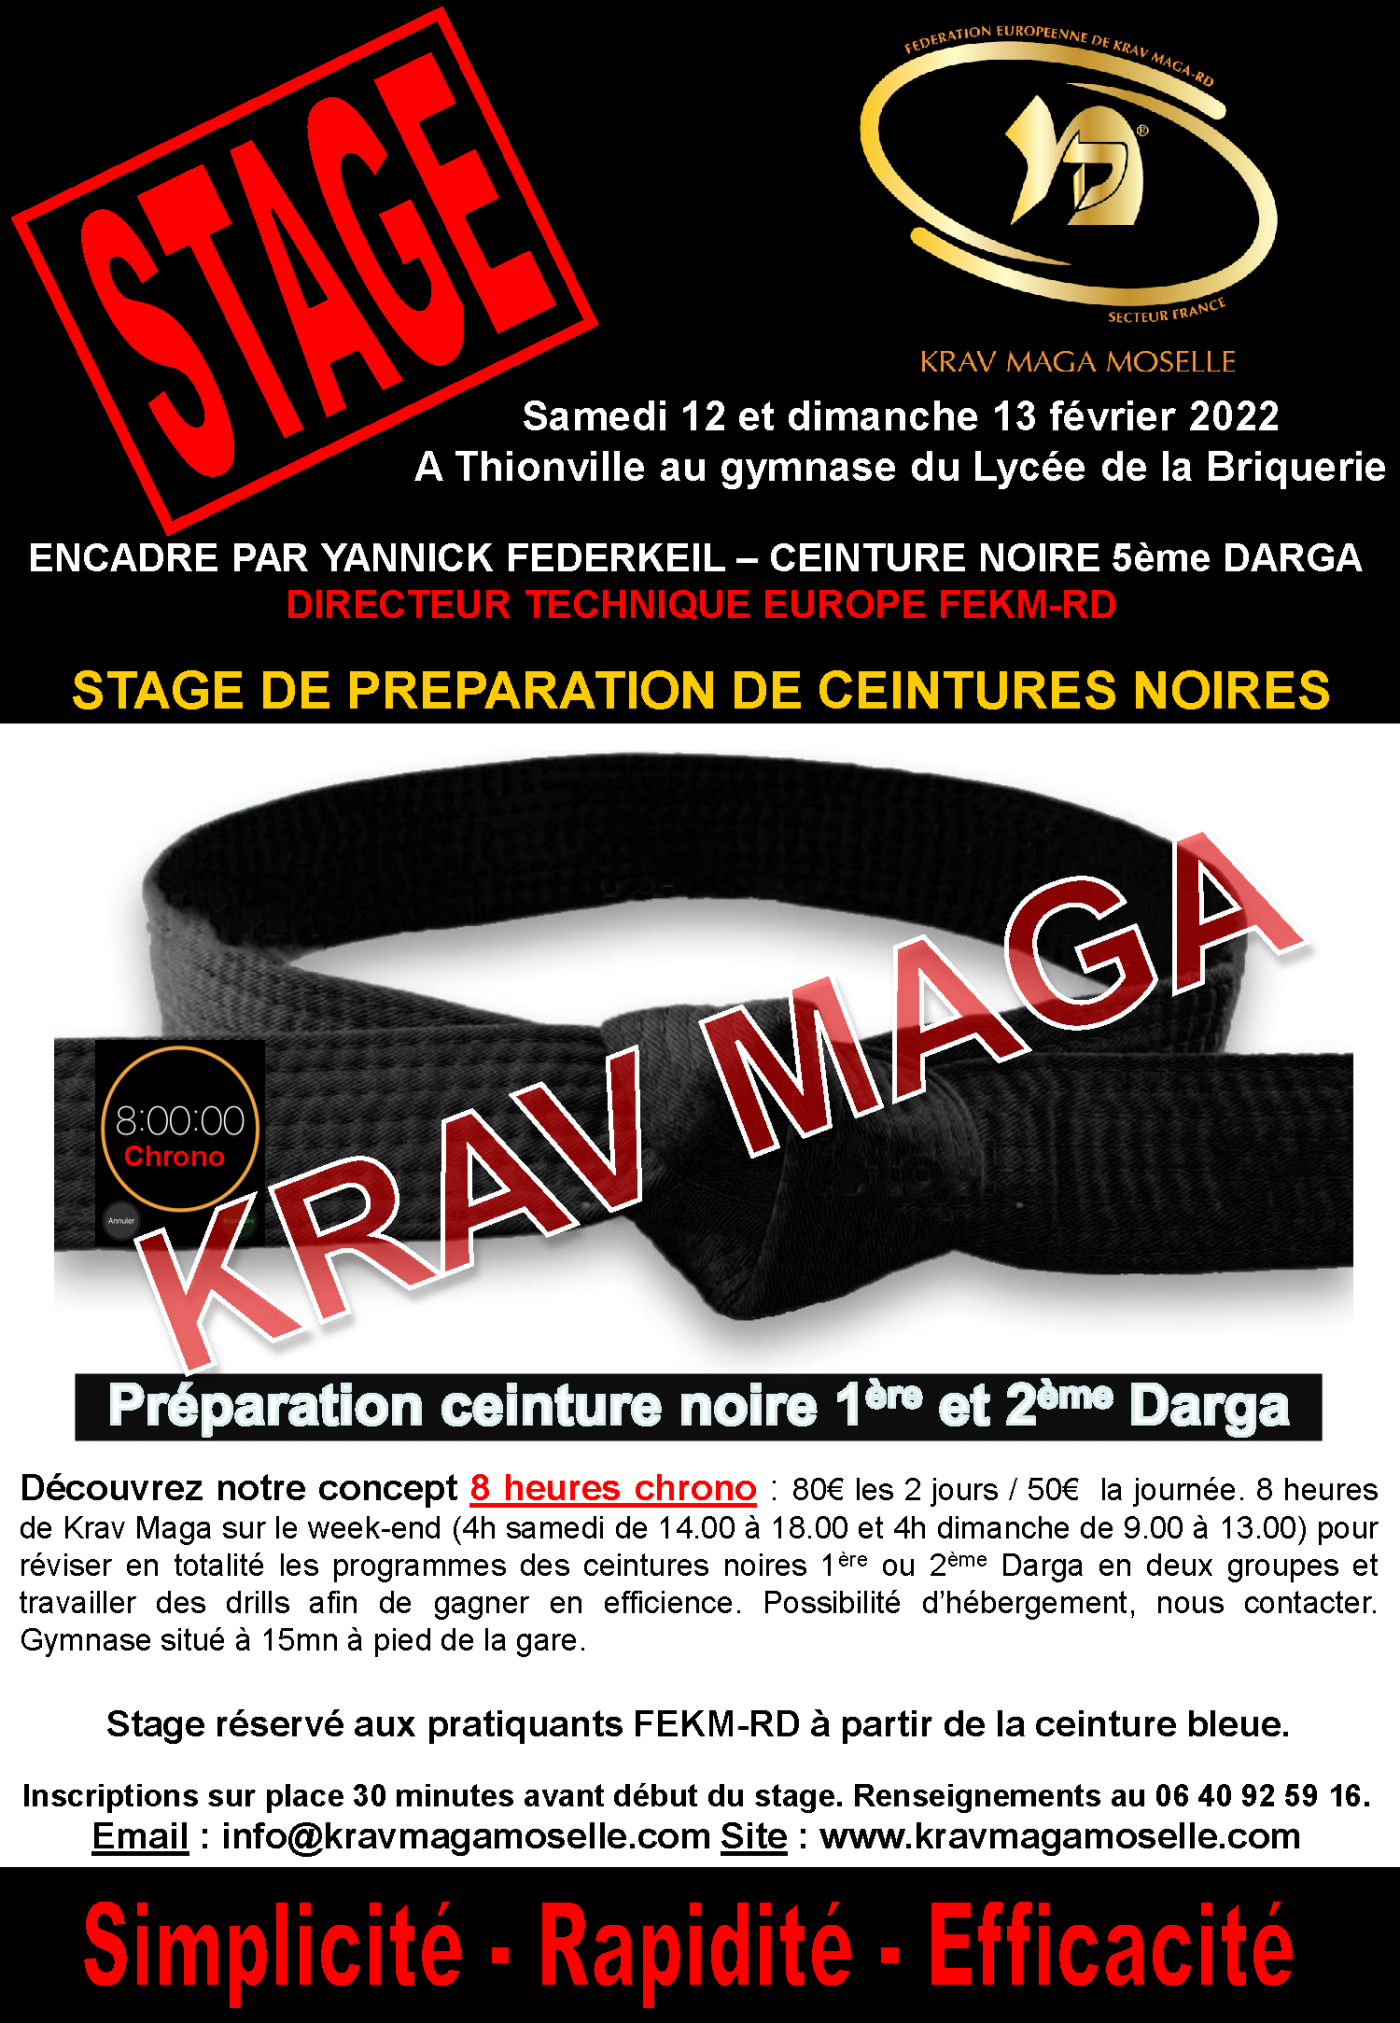 Preparation of black belts 1st and 2nd Darga - Thionville